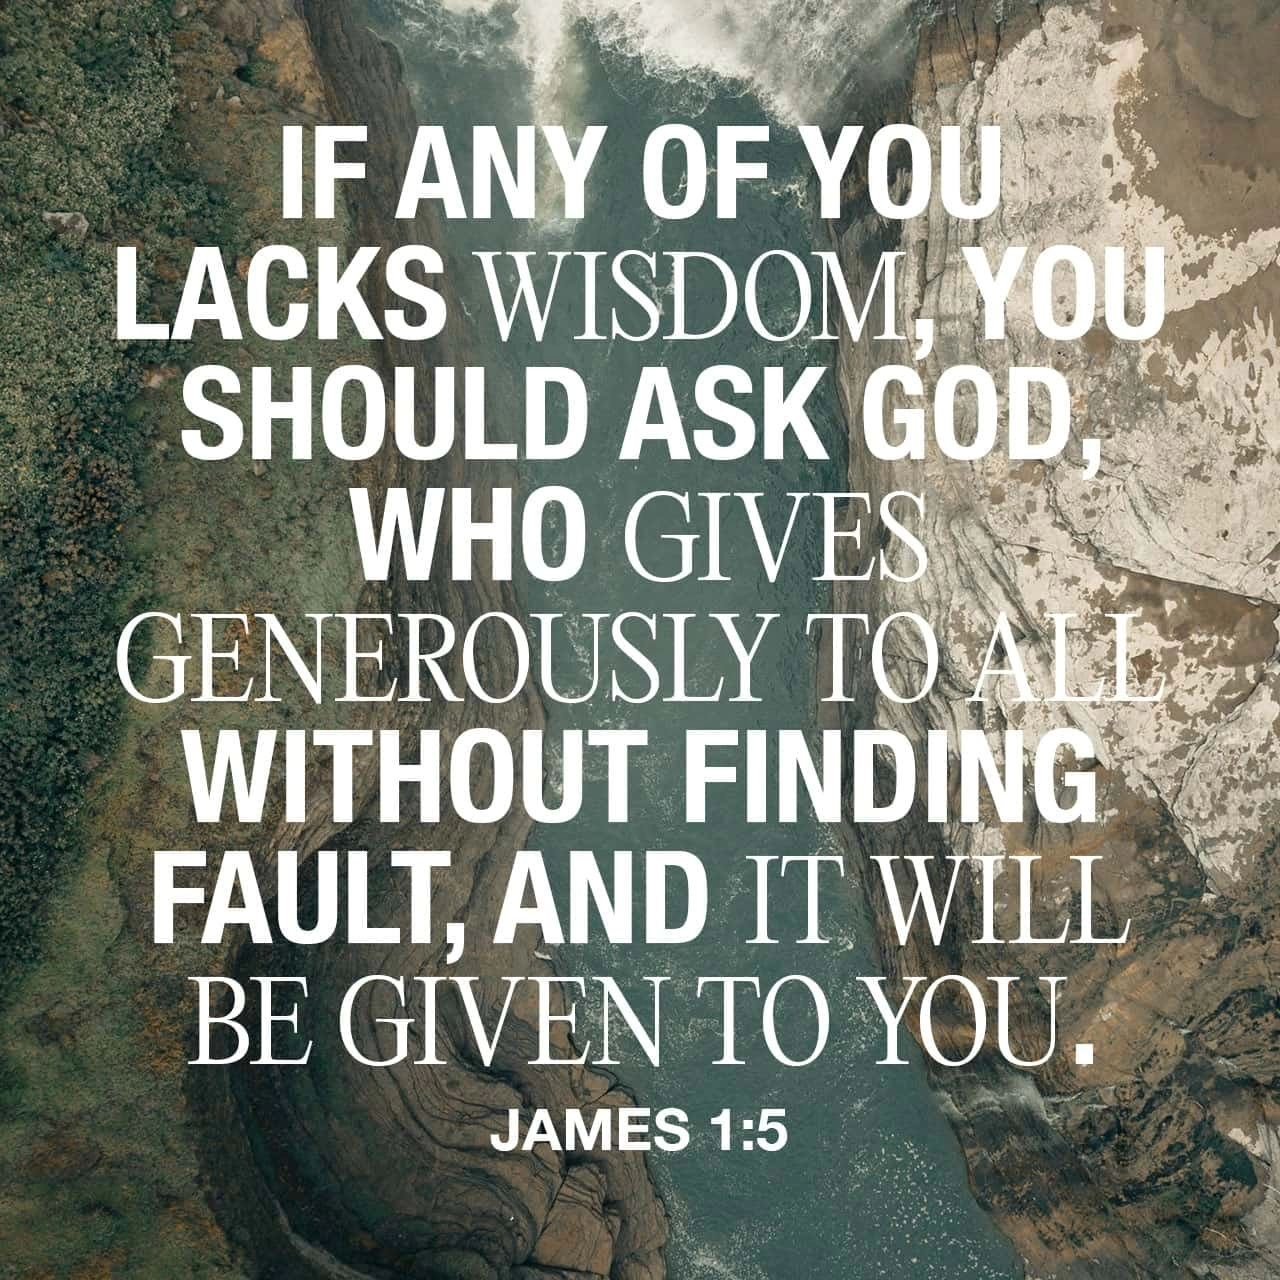 When we go through trials, we can ask God for wisdom. 

What do you need to ask God for wisdom for this week? //

&quot;If any of you lacks wisdom, you should ask God, who gives generously to all without finding fault, and it will be given to you.&qu